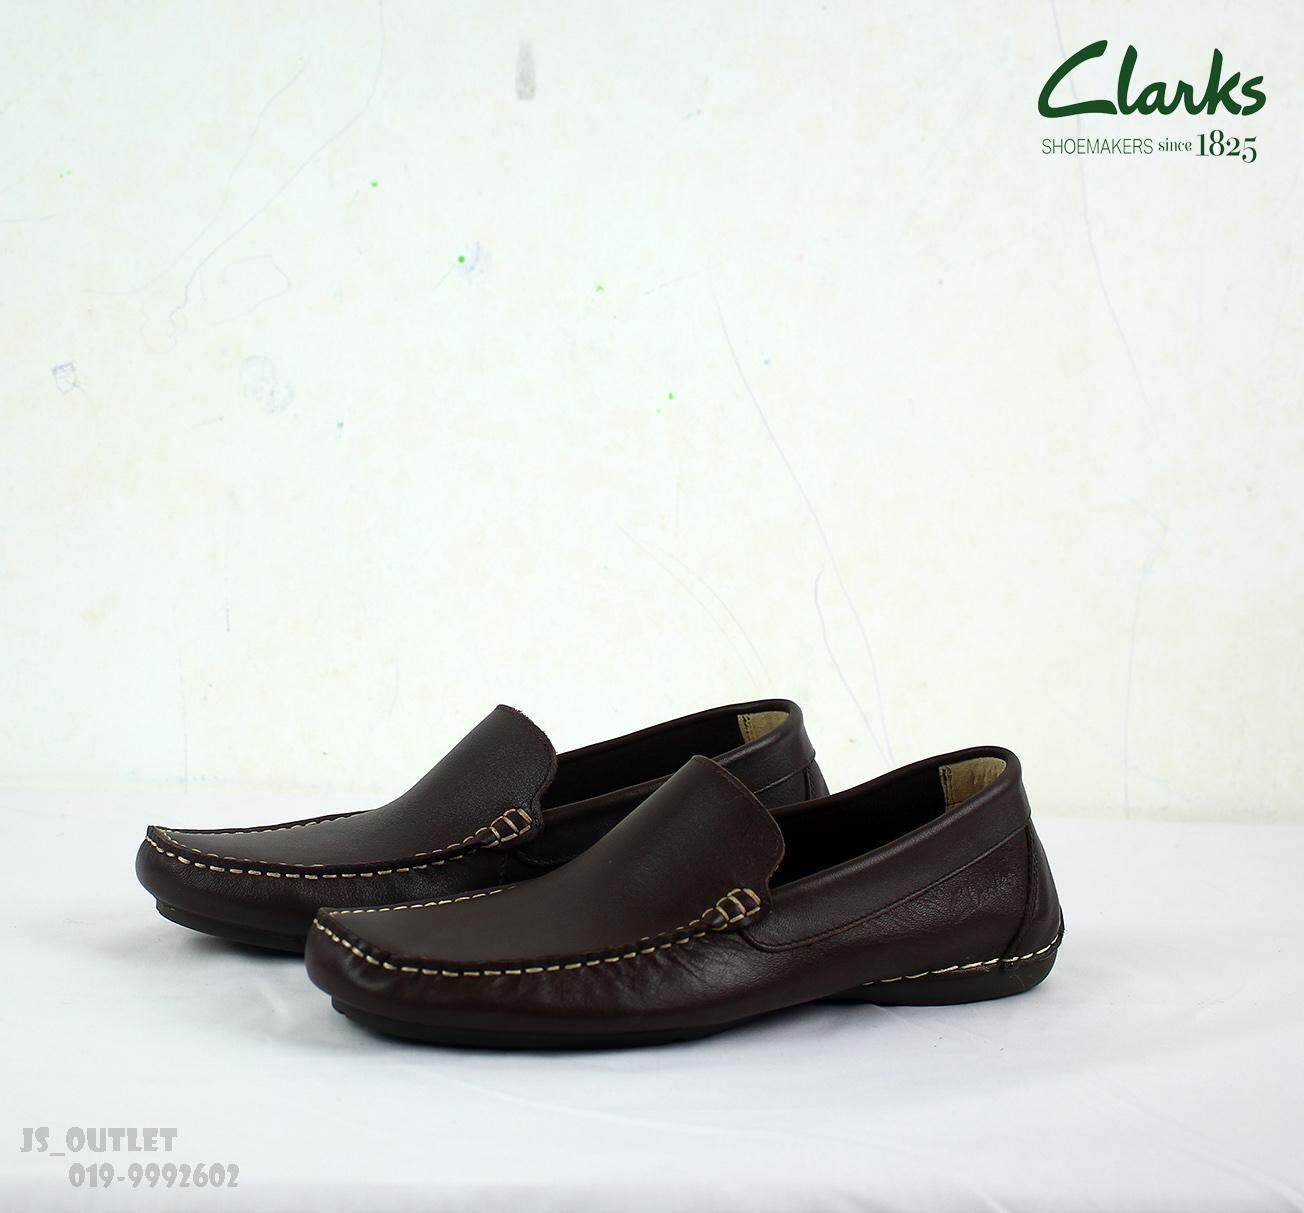 clarks shoes price in malaysia off 65 